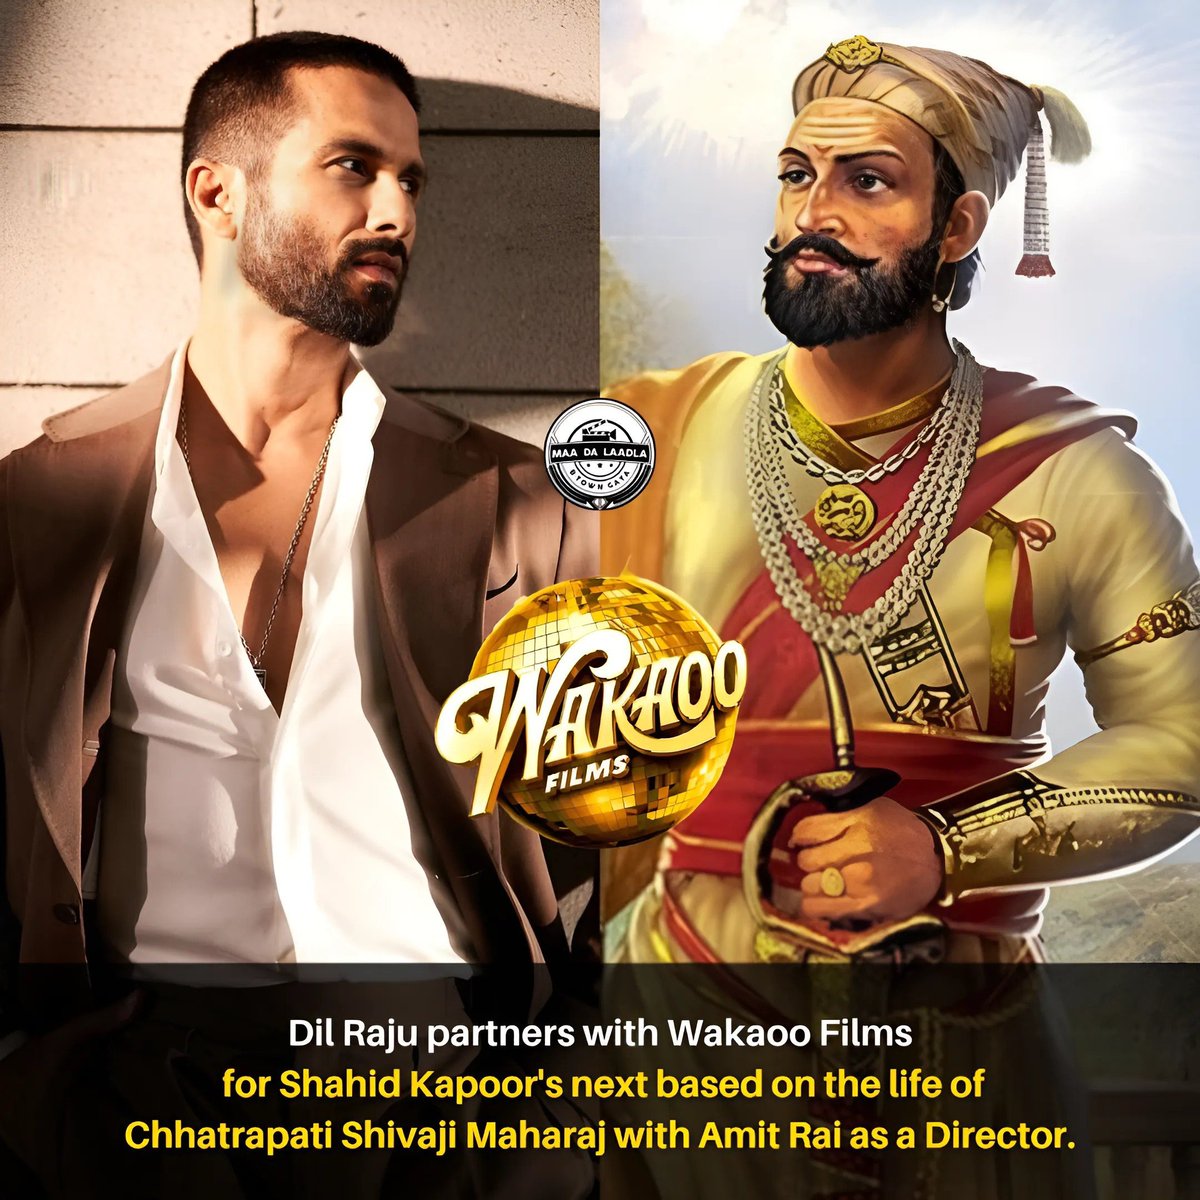 #DilRaju partners with #WakaooFilms for #ShahidKapoor's next based on the life of #ChhatrapatiShivajiMaharaj with #AmitRai as a Director. ⚔️🛡️🕉️

@shahidkapoor @wakaoofilms #Shanatics